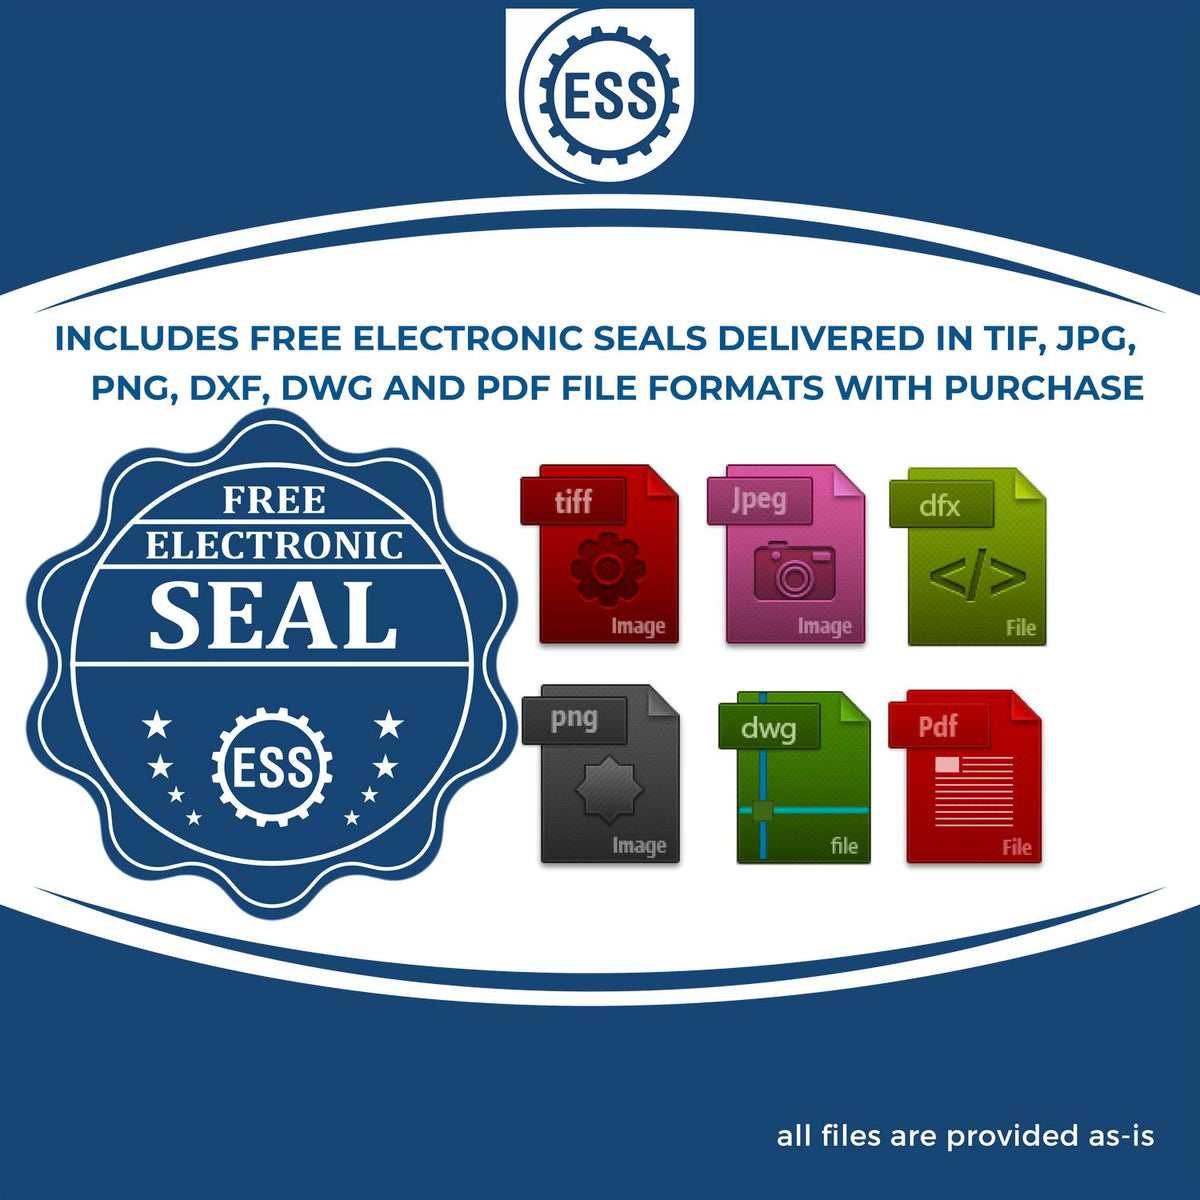 An infographic for the free electronic seal for the Handheld Delaware Land Surveyor Seal illustrating the different file type icons such as DXF, DWG, TIF, JPG and PNG.